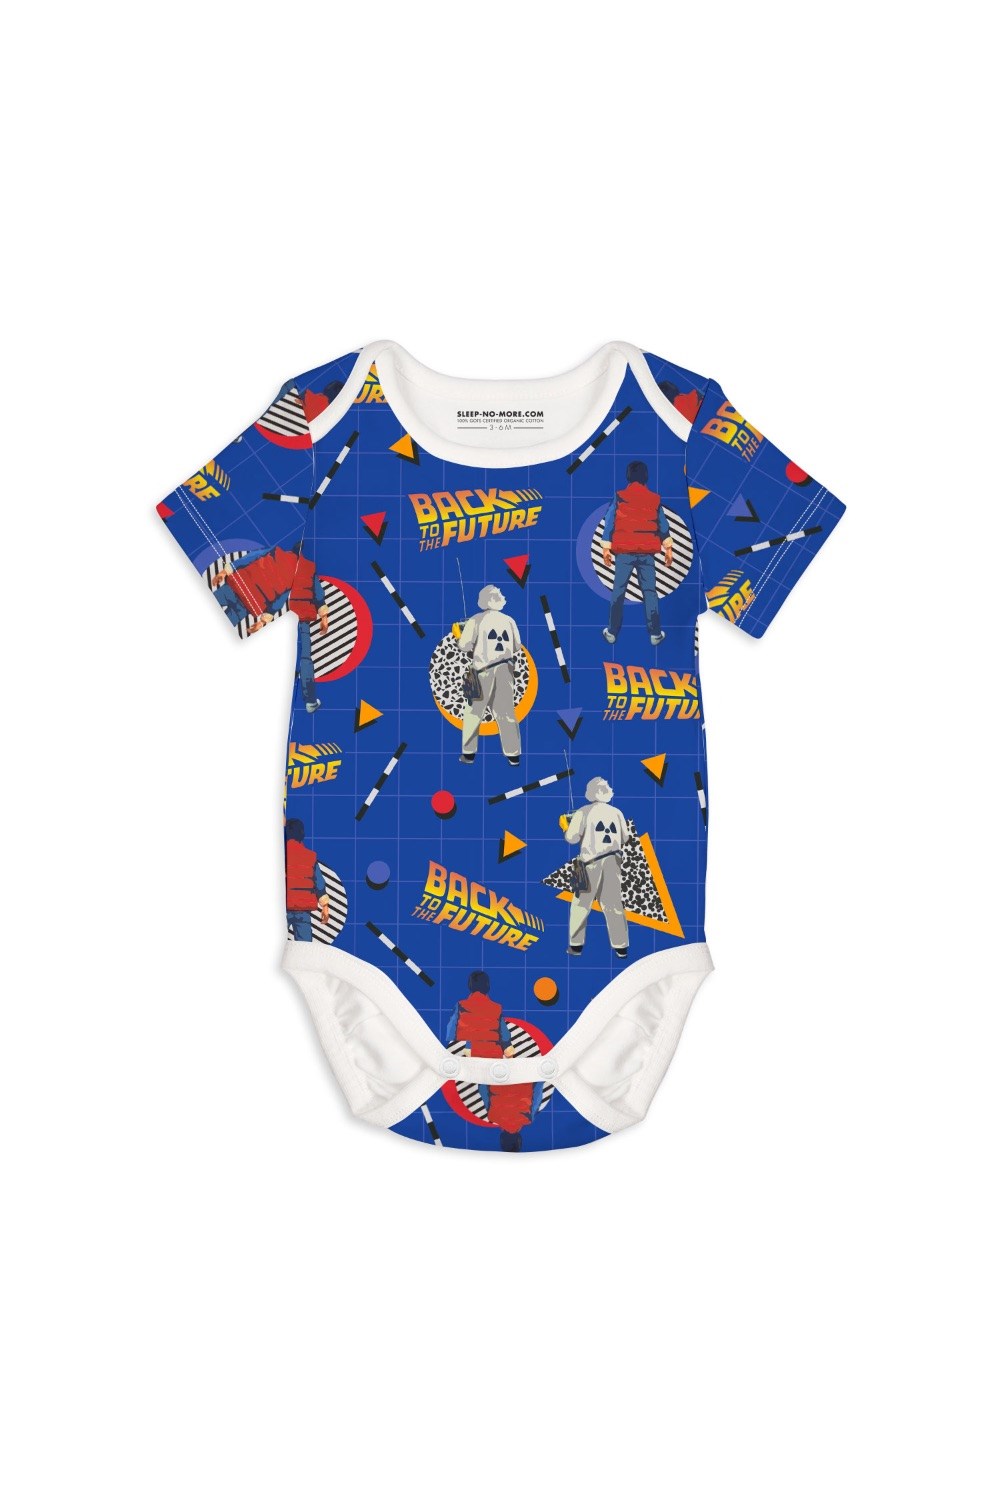 Back To The Future 01 Short Sleeved Baby Bodysuit -